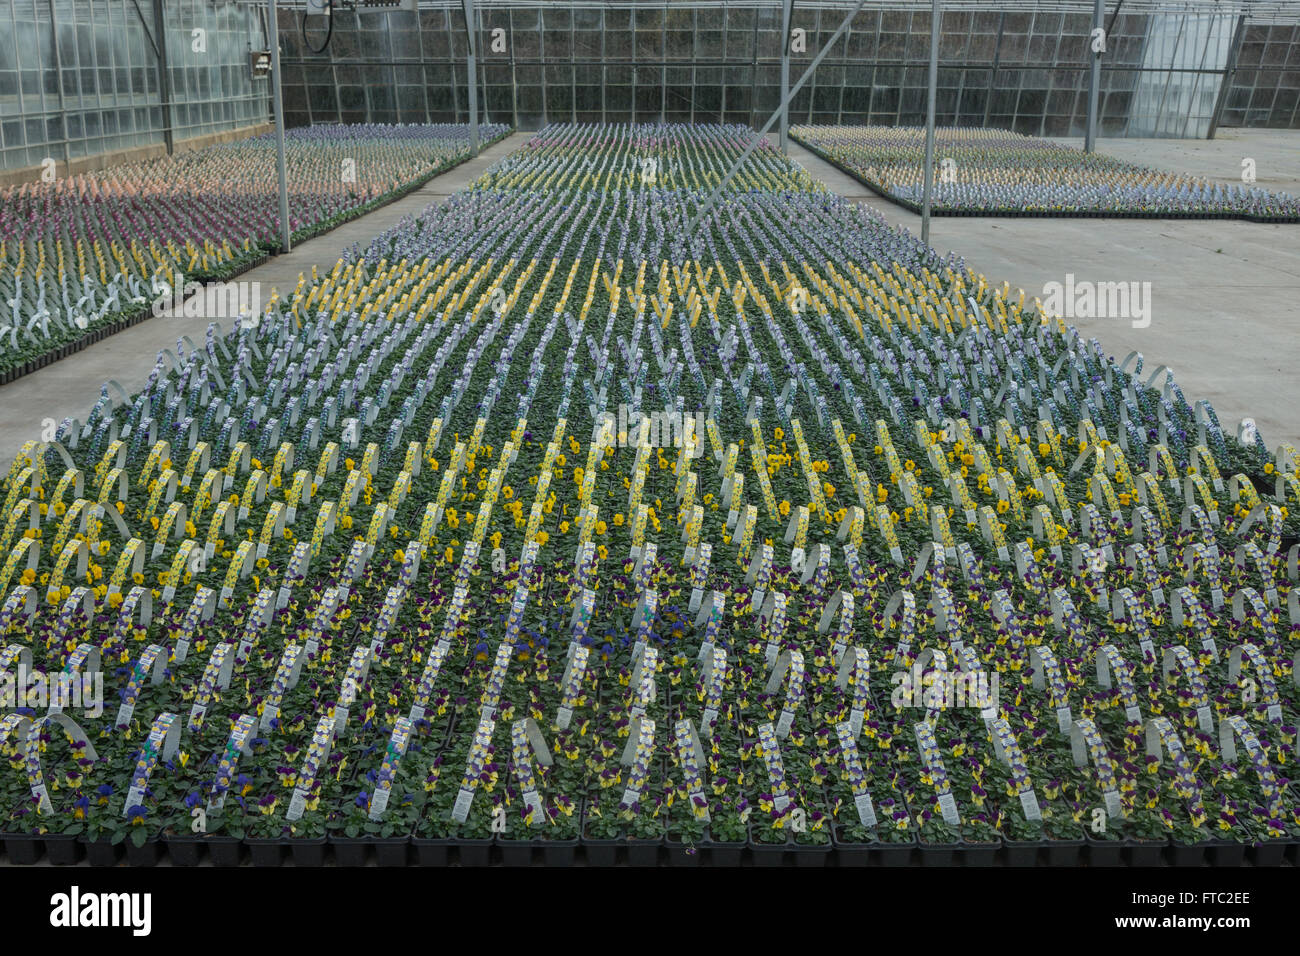 flower nursery, commercial greenhouse, Stock Photo